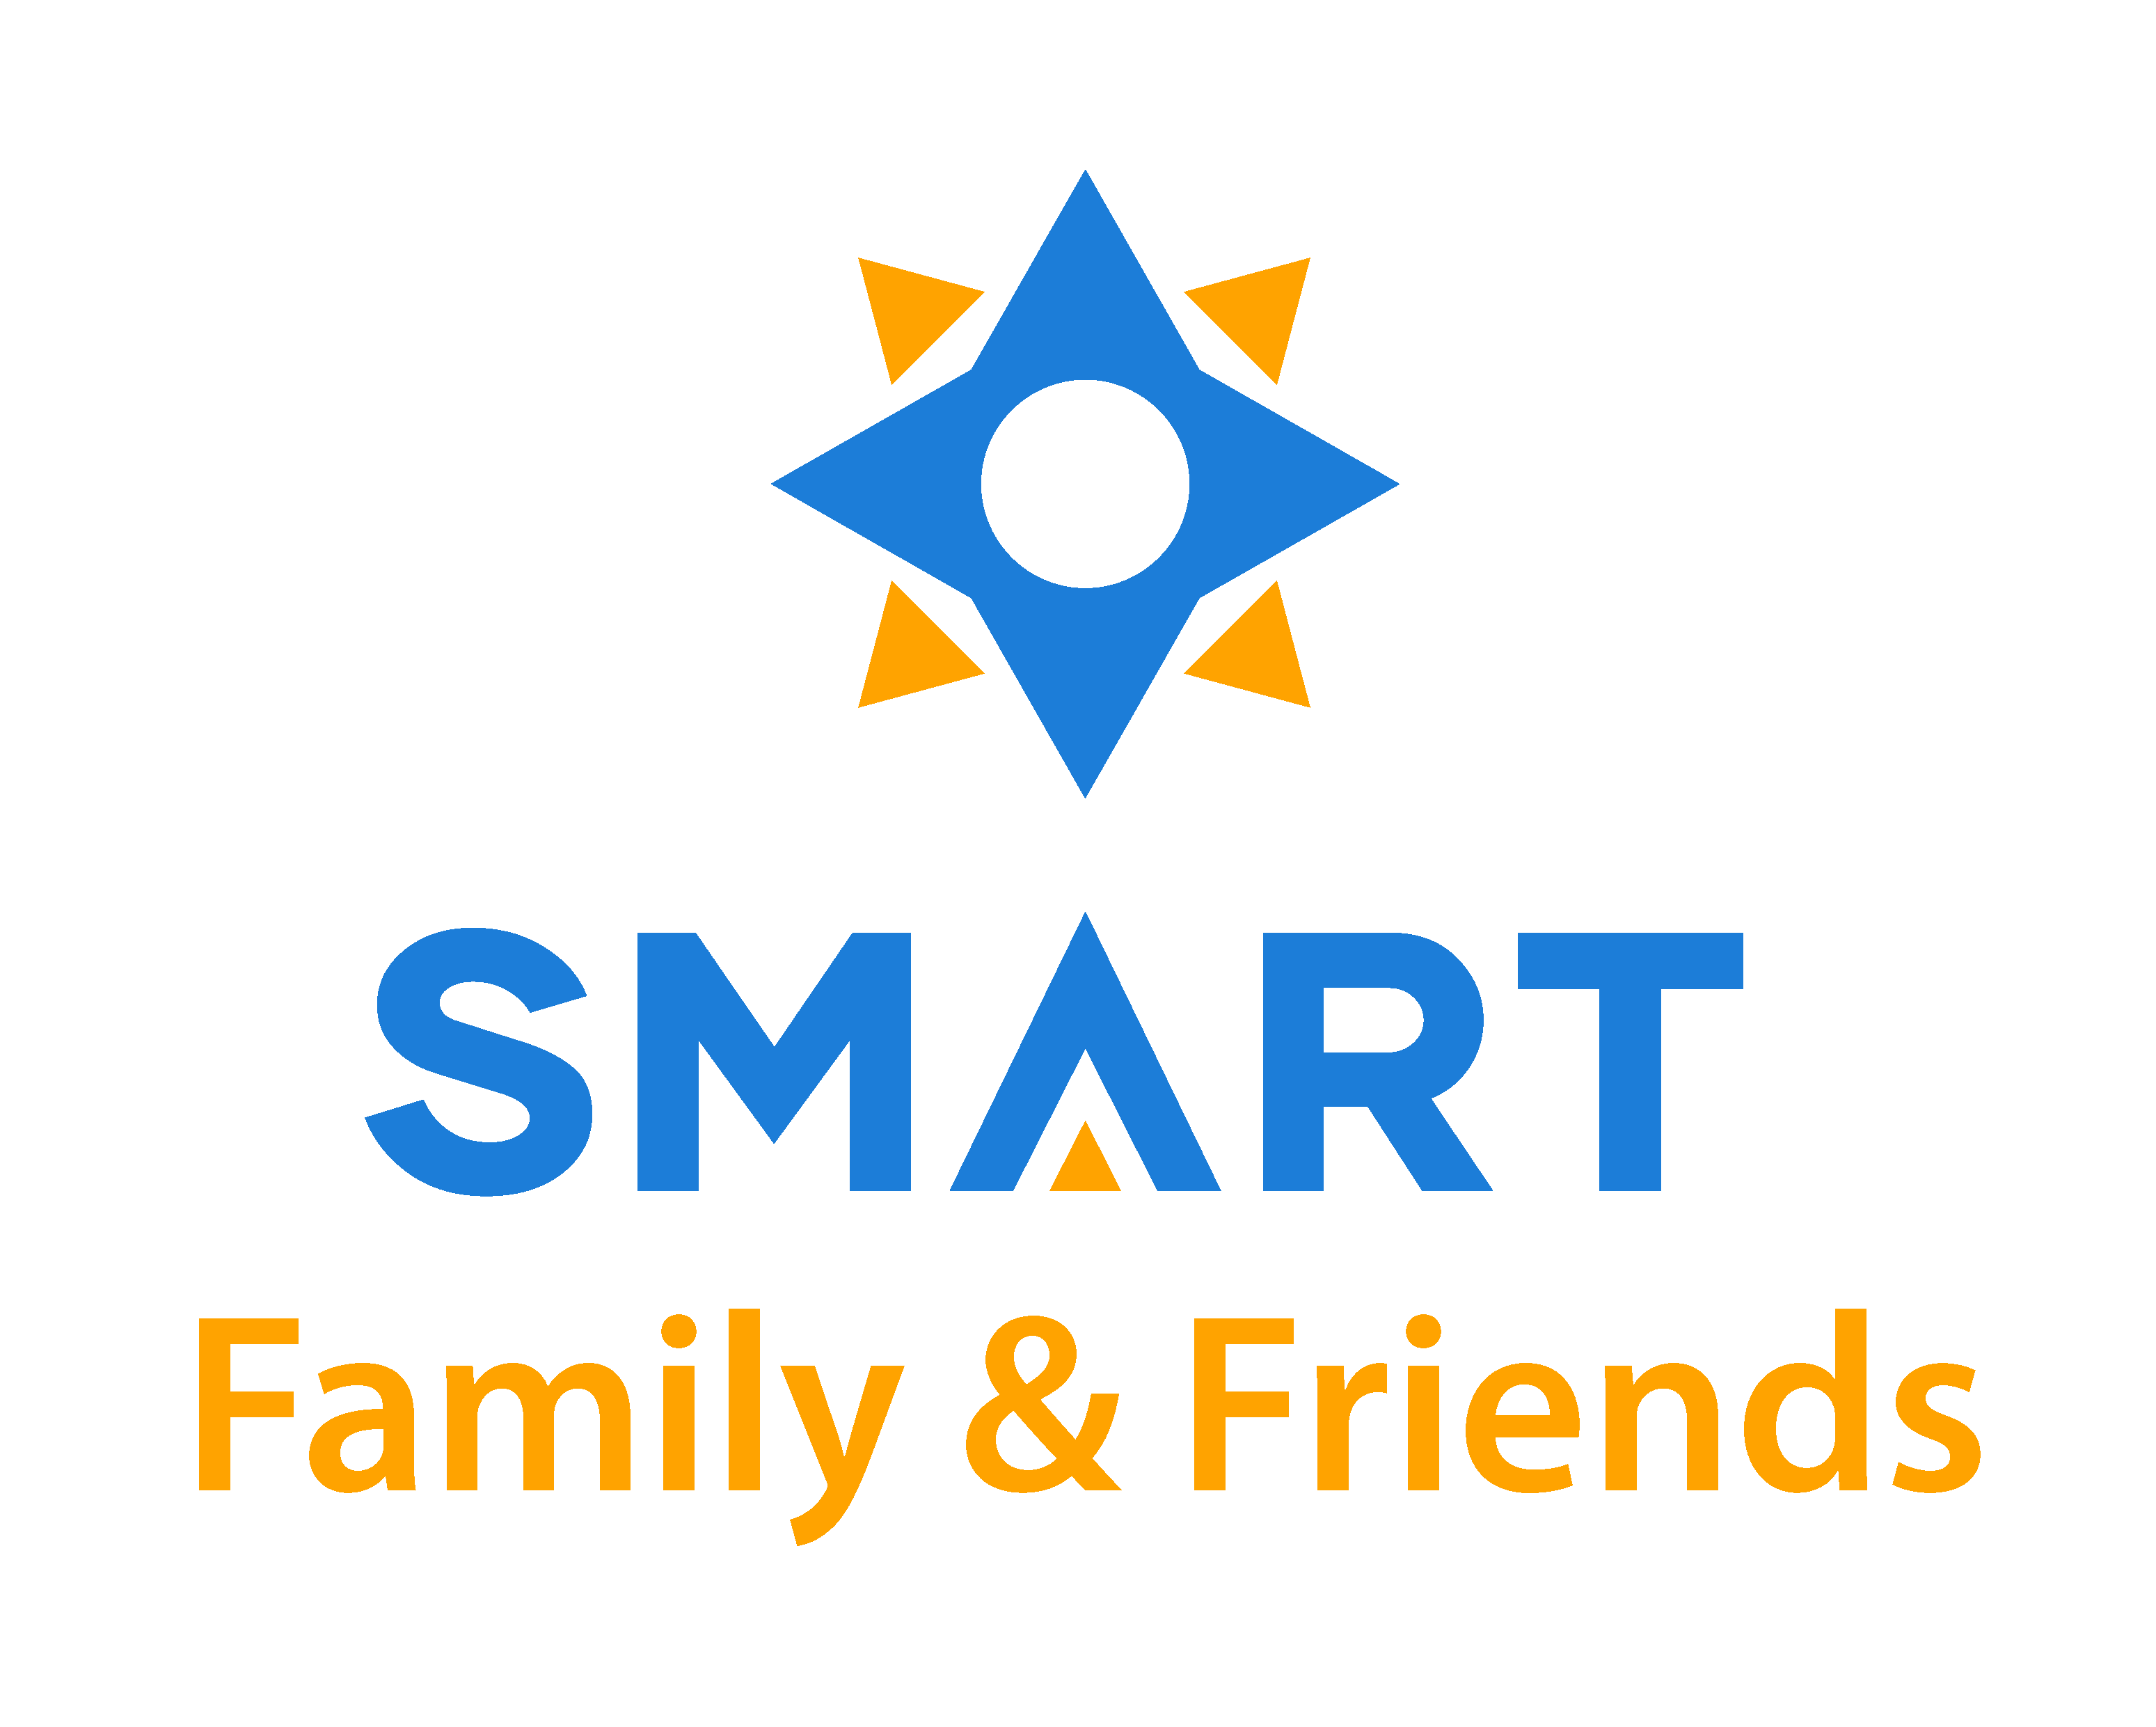 Anglicare Tasmania provides SMART Family and Friends sessions